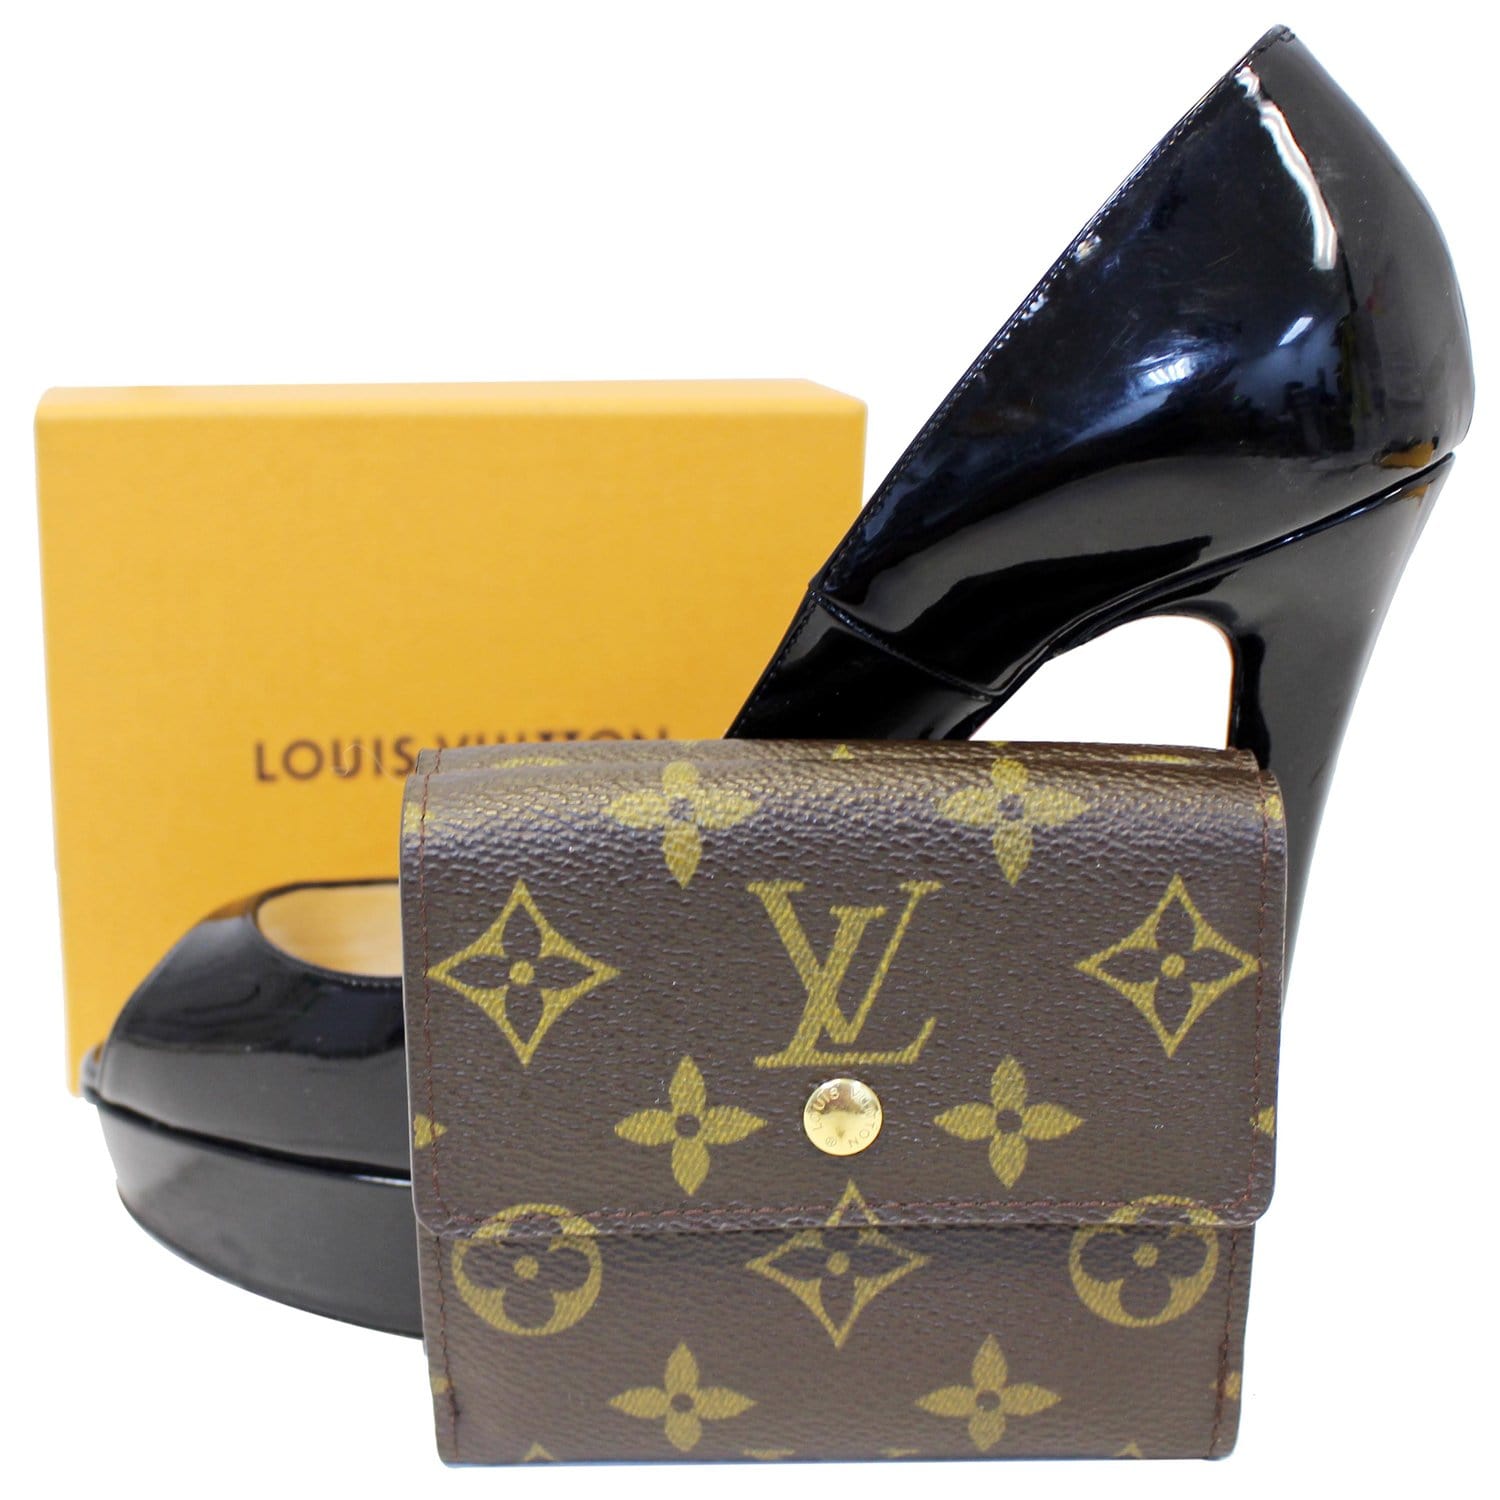 Louis Vuitton Elise in monogram canvas, Shoes and Accessories